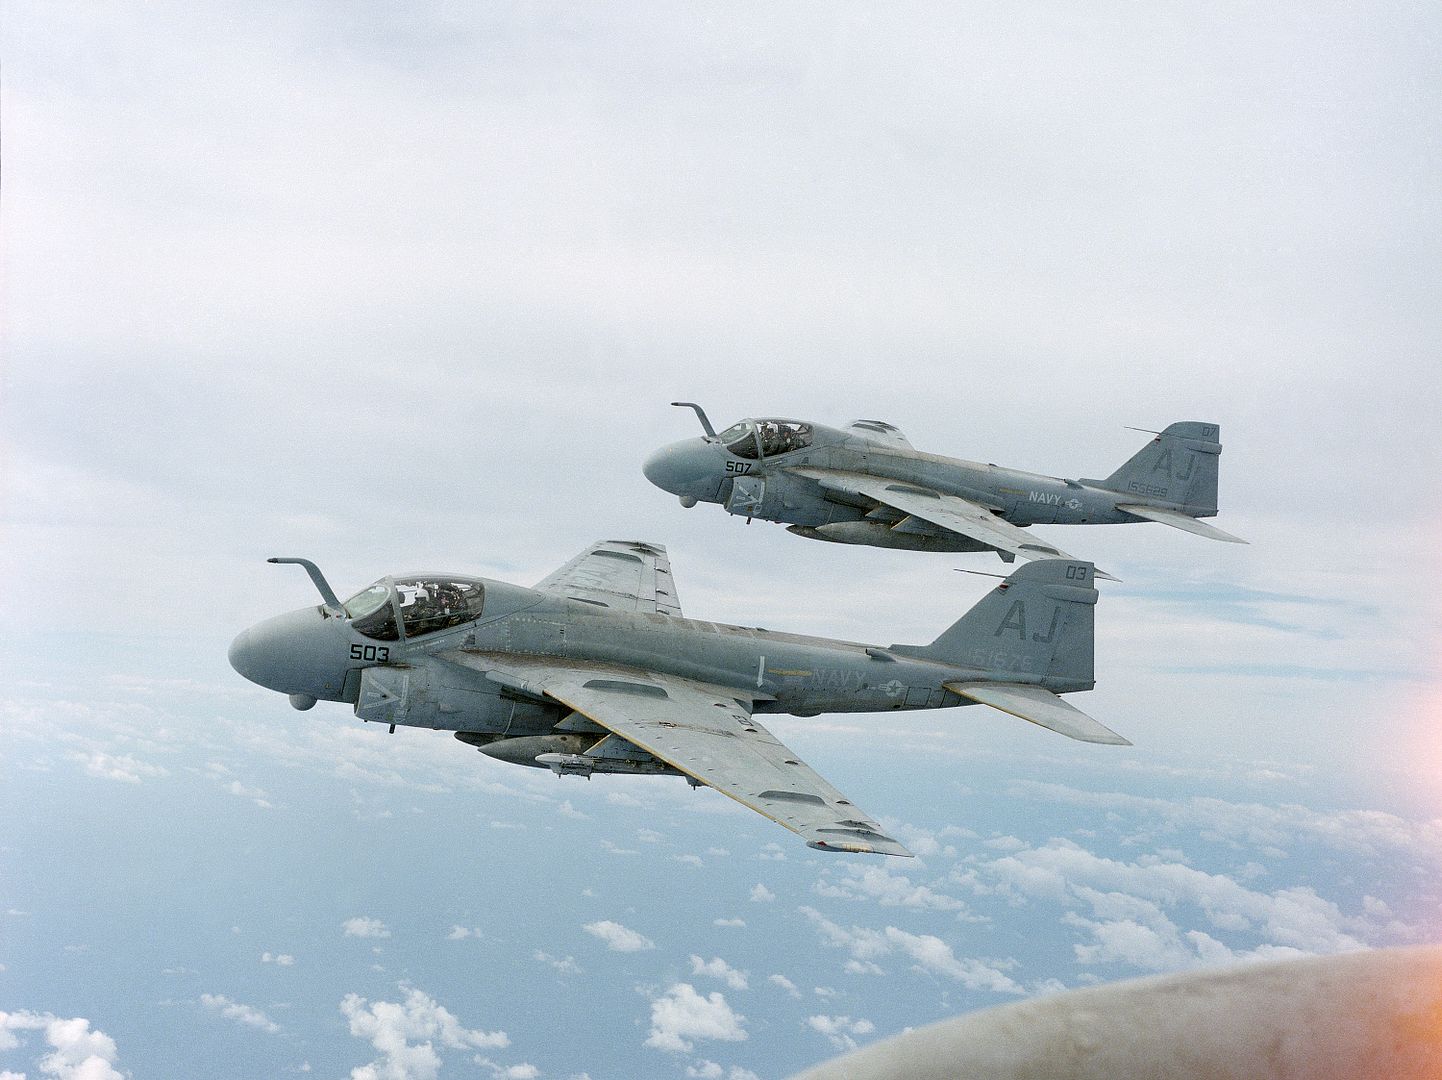 An Air To Air Left Side View Of Two Attack Squadron 35 A 6E Intruder Aircraft